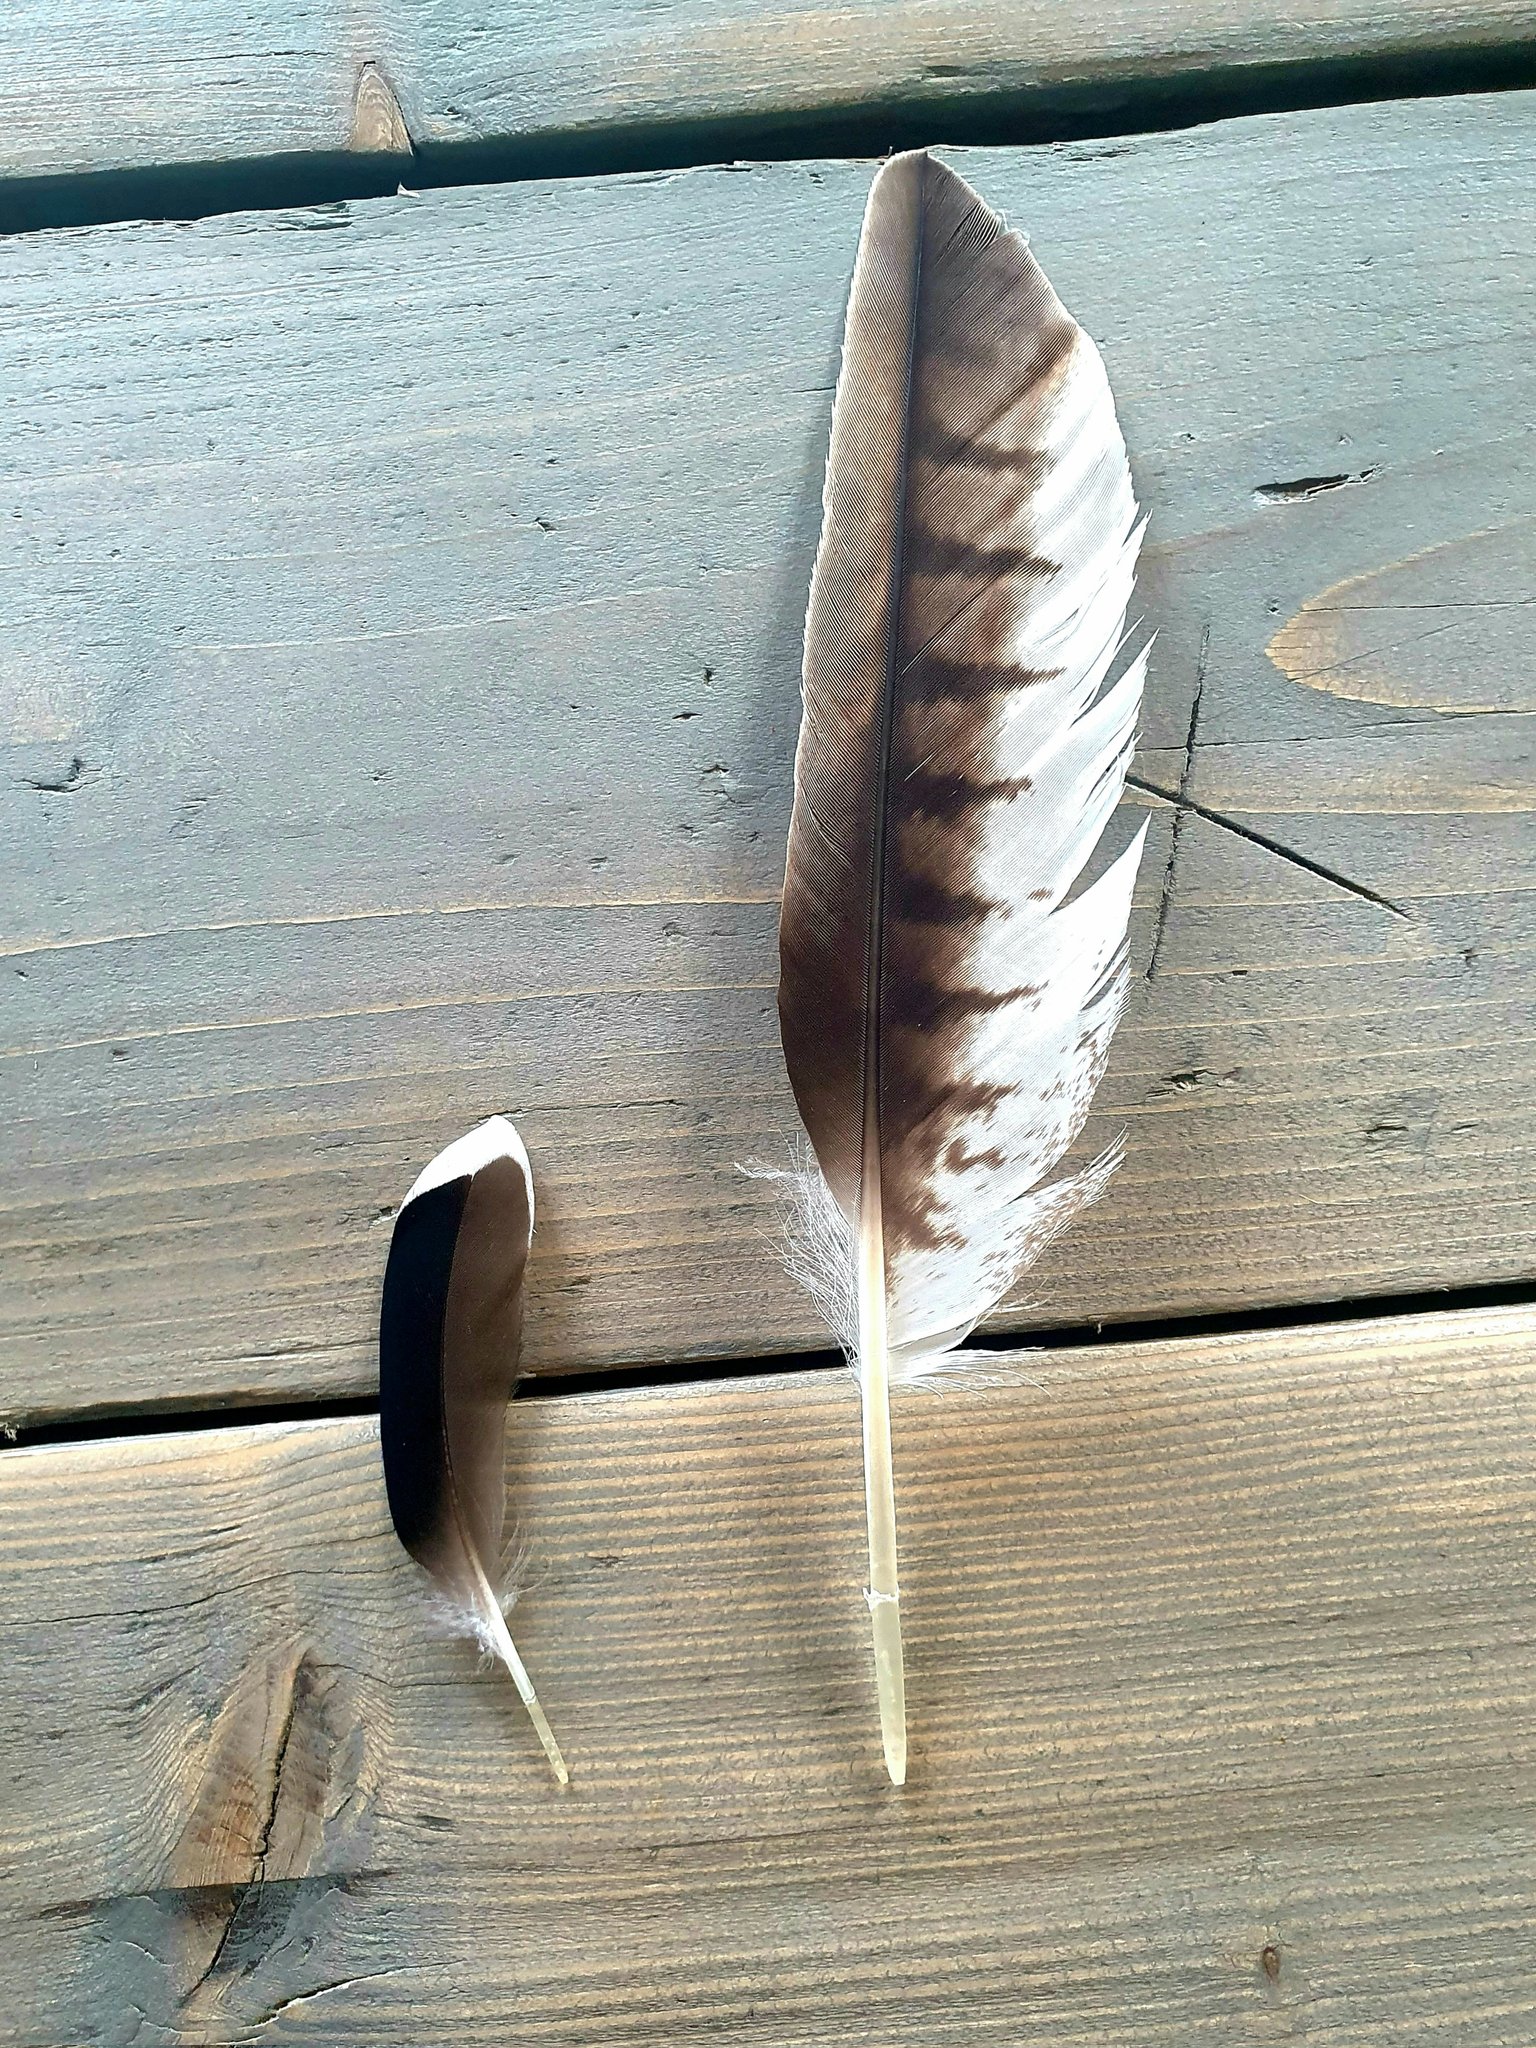 Flora&Pheasant on Twitter: "Fun Fact Day. These Secondary Flight Feathers from two very different avian friends; on the left, a Mallard, and right, a Red Kite. Both glorious in their own